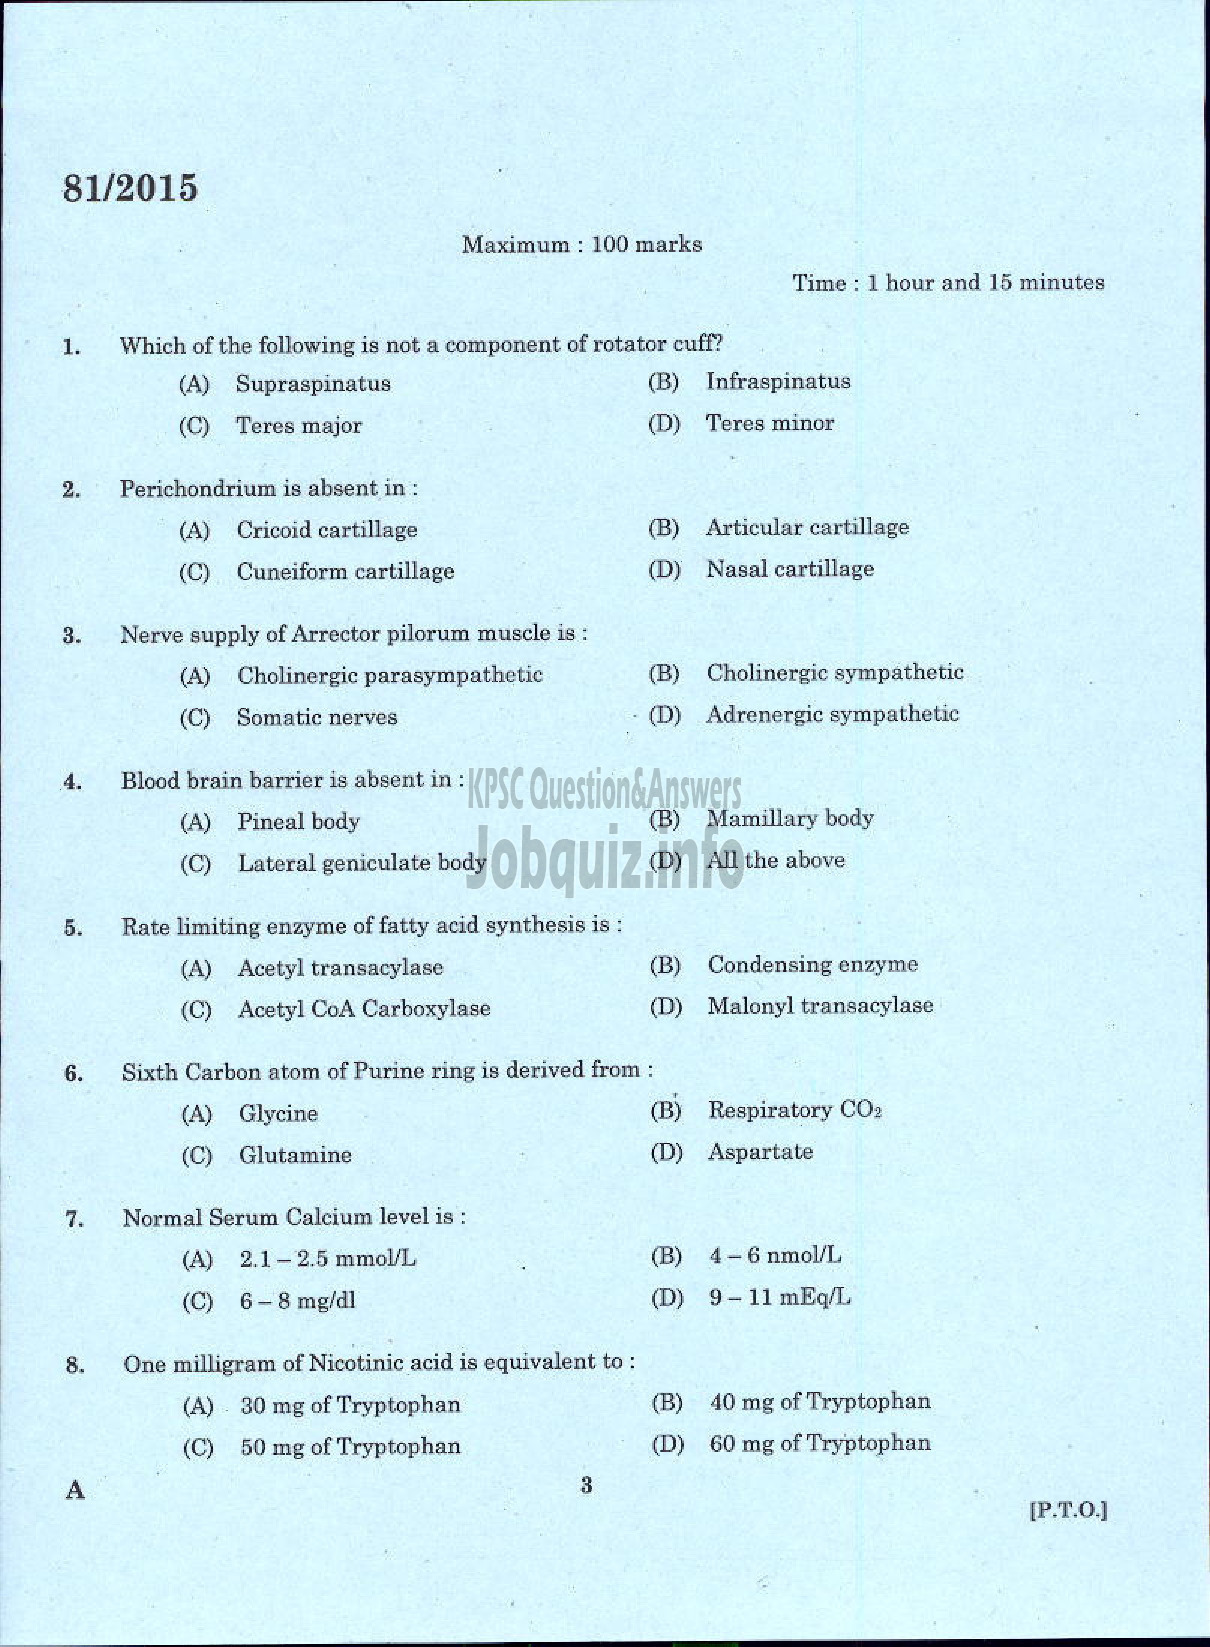 Kerala PSC Question Paper - ASSISTANT SURGEON CASUALITY MEDICAL OFFICER HEALTH SERVICES MEDICAL OFFICER KERALA FACTORIES ANS BOILERS SERVICE ASSISTANT INSURANCE MEDICAL OFFICER IMS-1